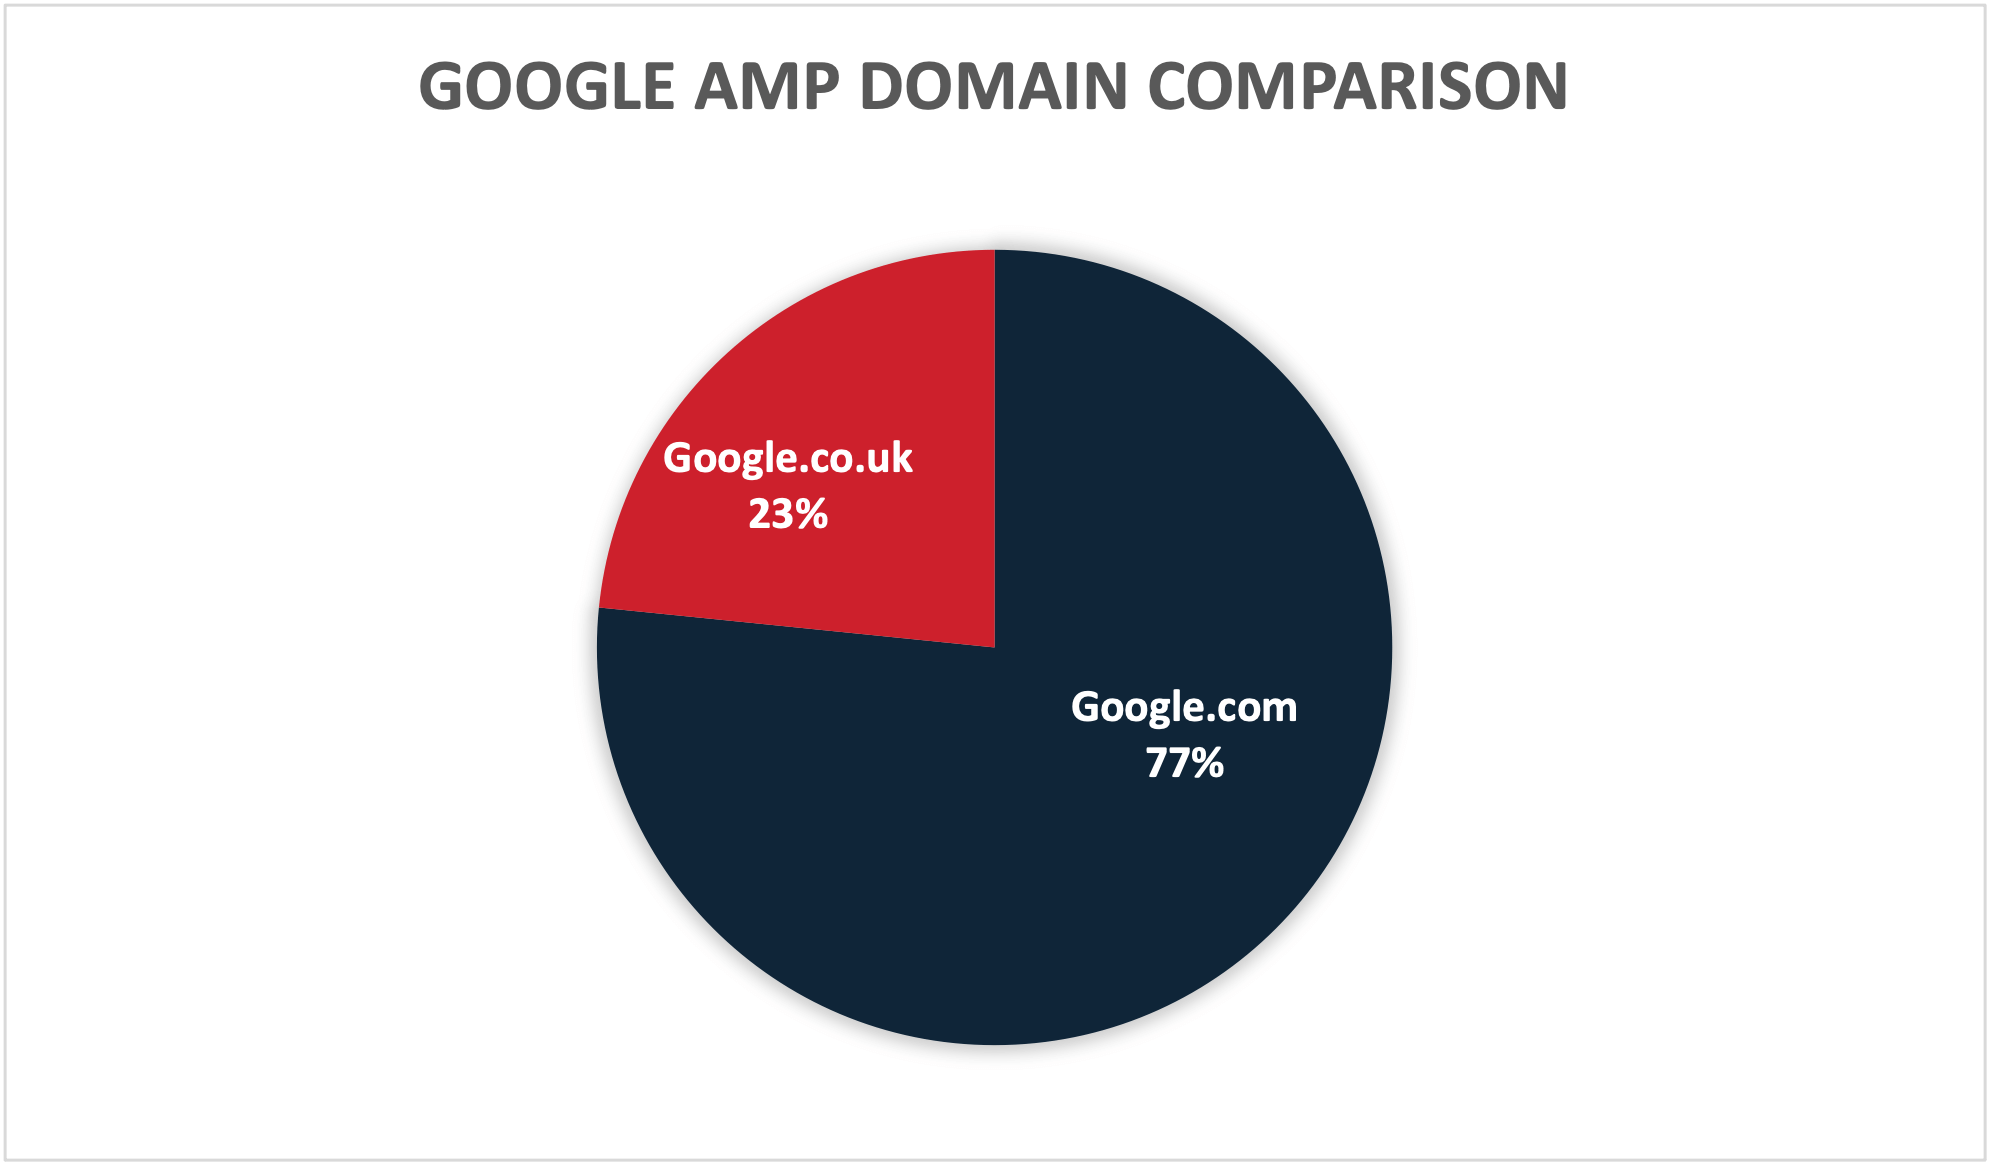 Figure 4: Comparison between the domains used by phishing emails utilizing Google AMP. 